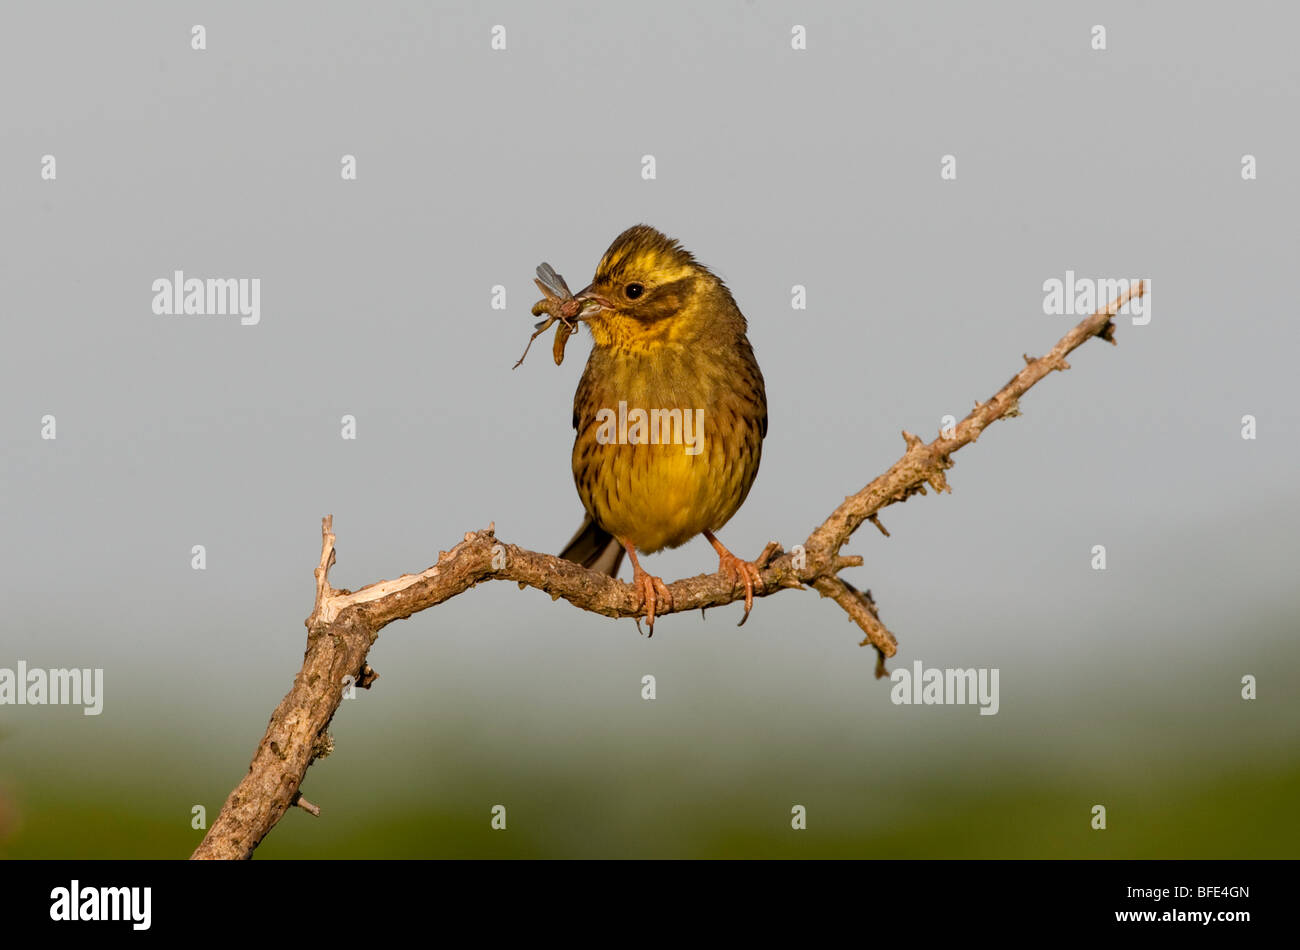 Emberiza citrinella, Yellowhammer with insect prey Stock Photo